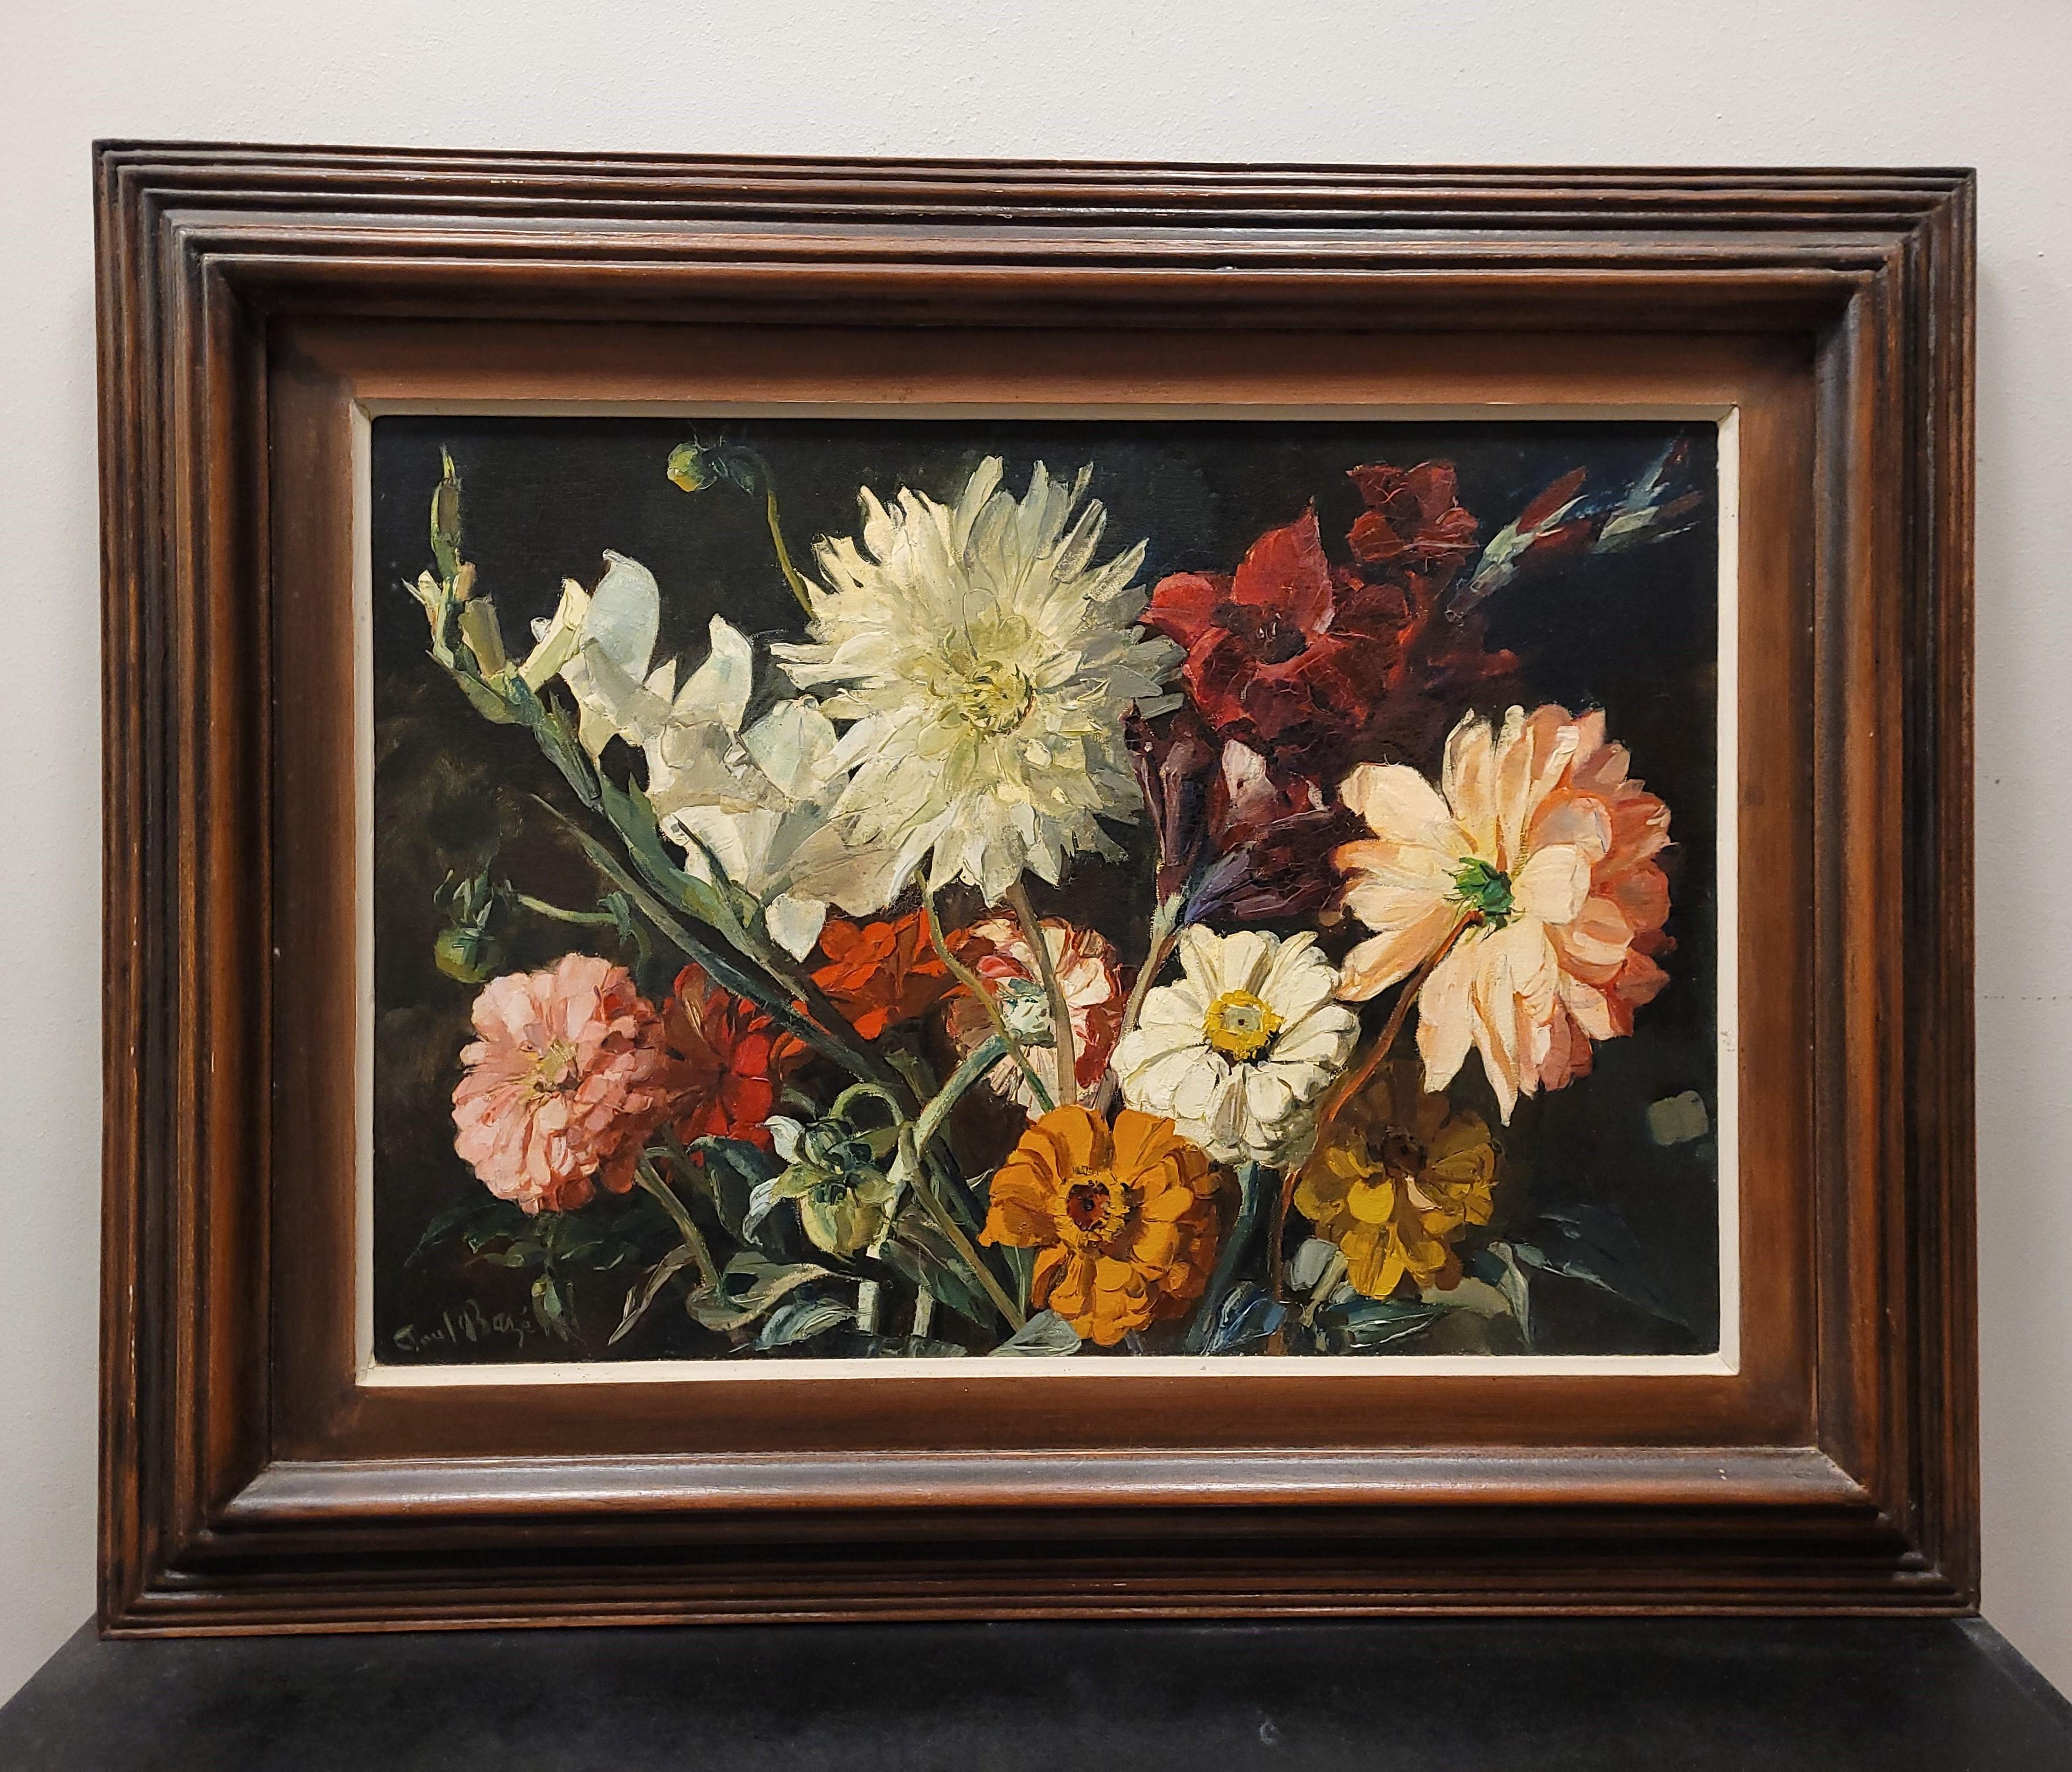 Impressive and very beautiful  oil on panel made by Paul Robert Bazé, an artist of French origin. It represents a still life with a bouquet of flowers in the foreground on a dark background. It mainly shows dahlias and camellias, which give the work